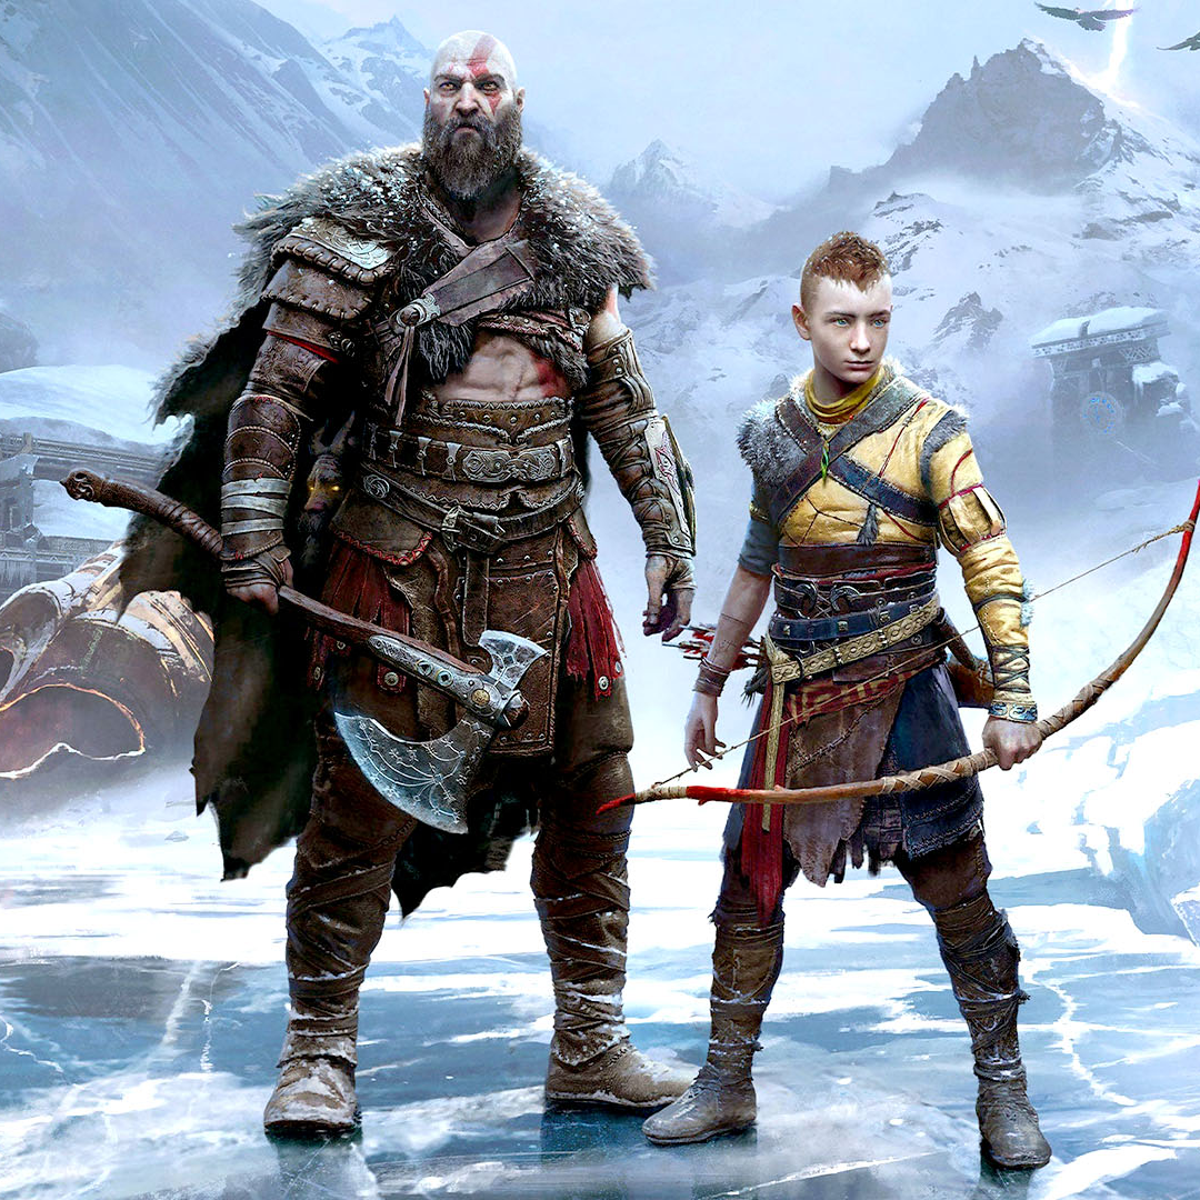 God of War: Ragnarök on PS5 is like a maxed-out PC port with